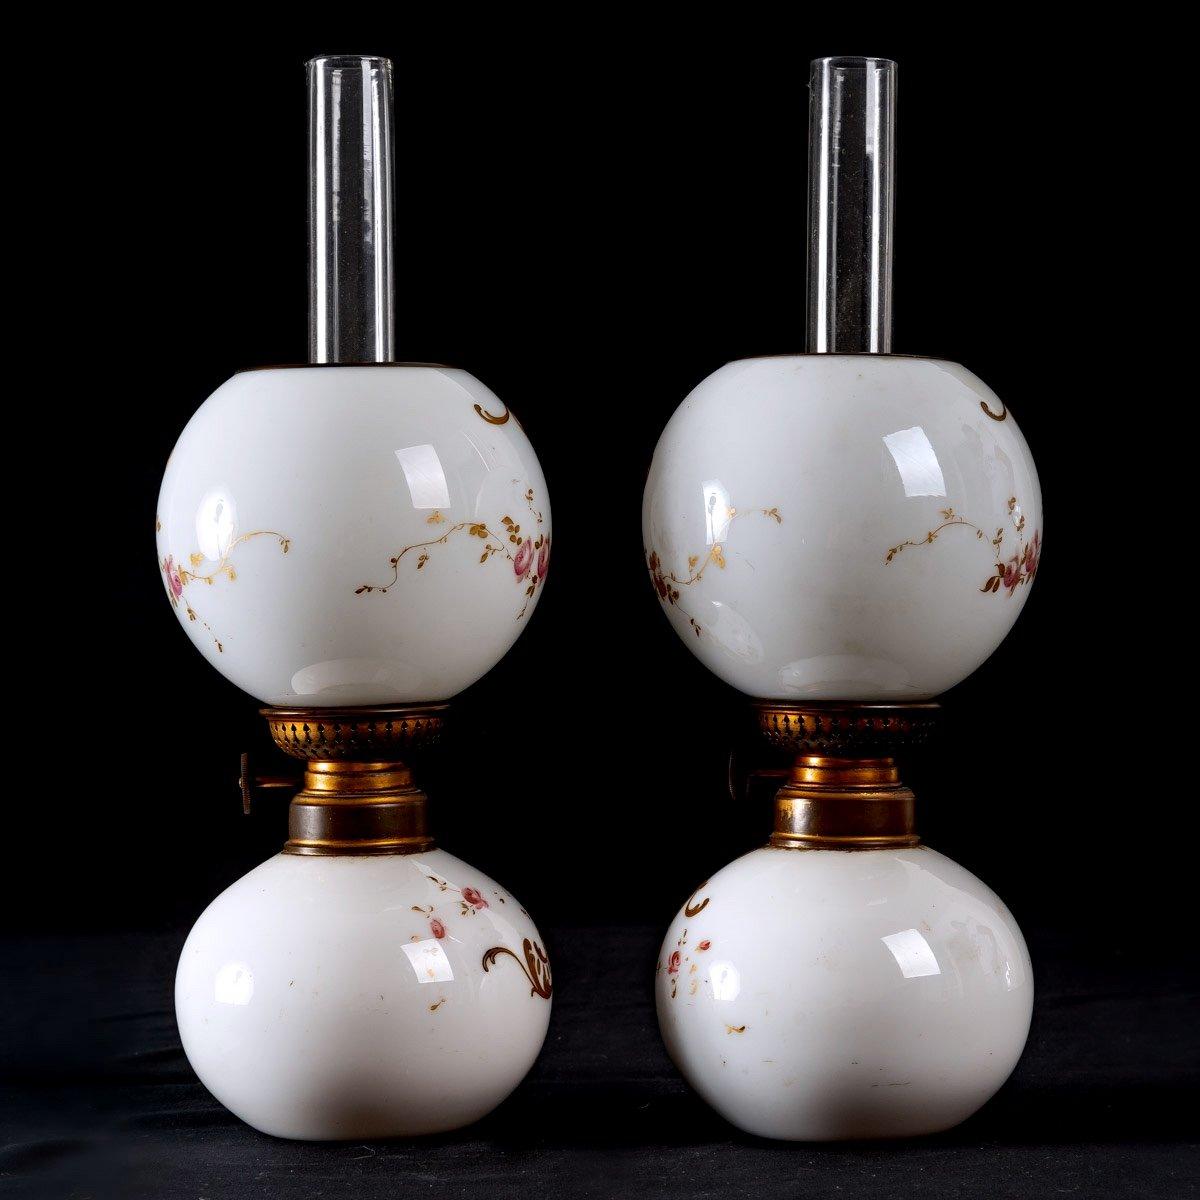 Pair of Quinquet, White Opaline, Maison Baccarat, Period: Early 19th Century For Sale 1